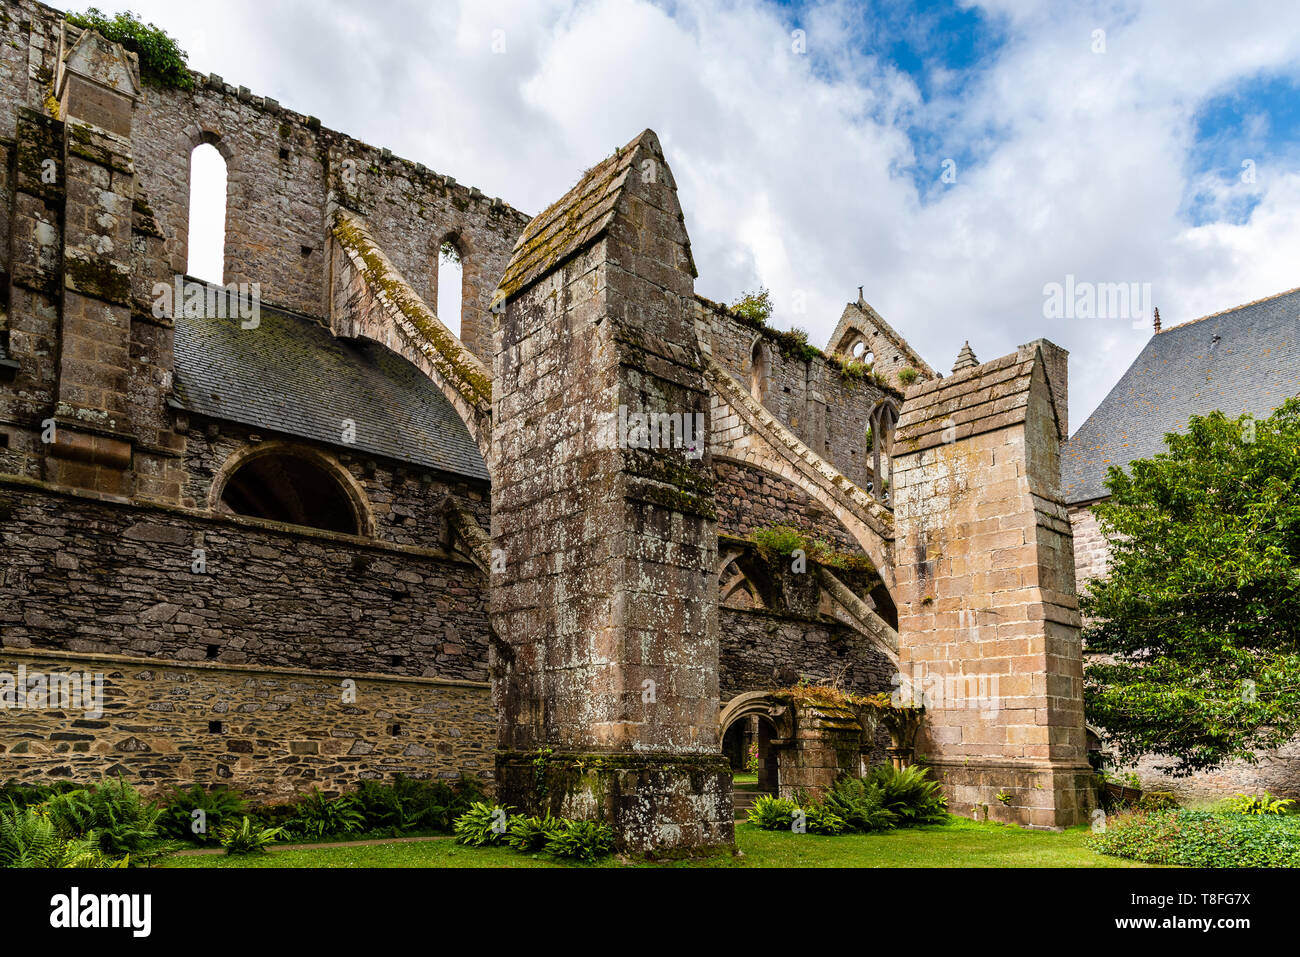 Paimpol, France - July 28, 2018: The Abbey of Beauport, Cotes-d'Armor, Brittany, France. Old Abbaye Maritime de Beauport Stock Photo